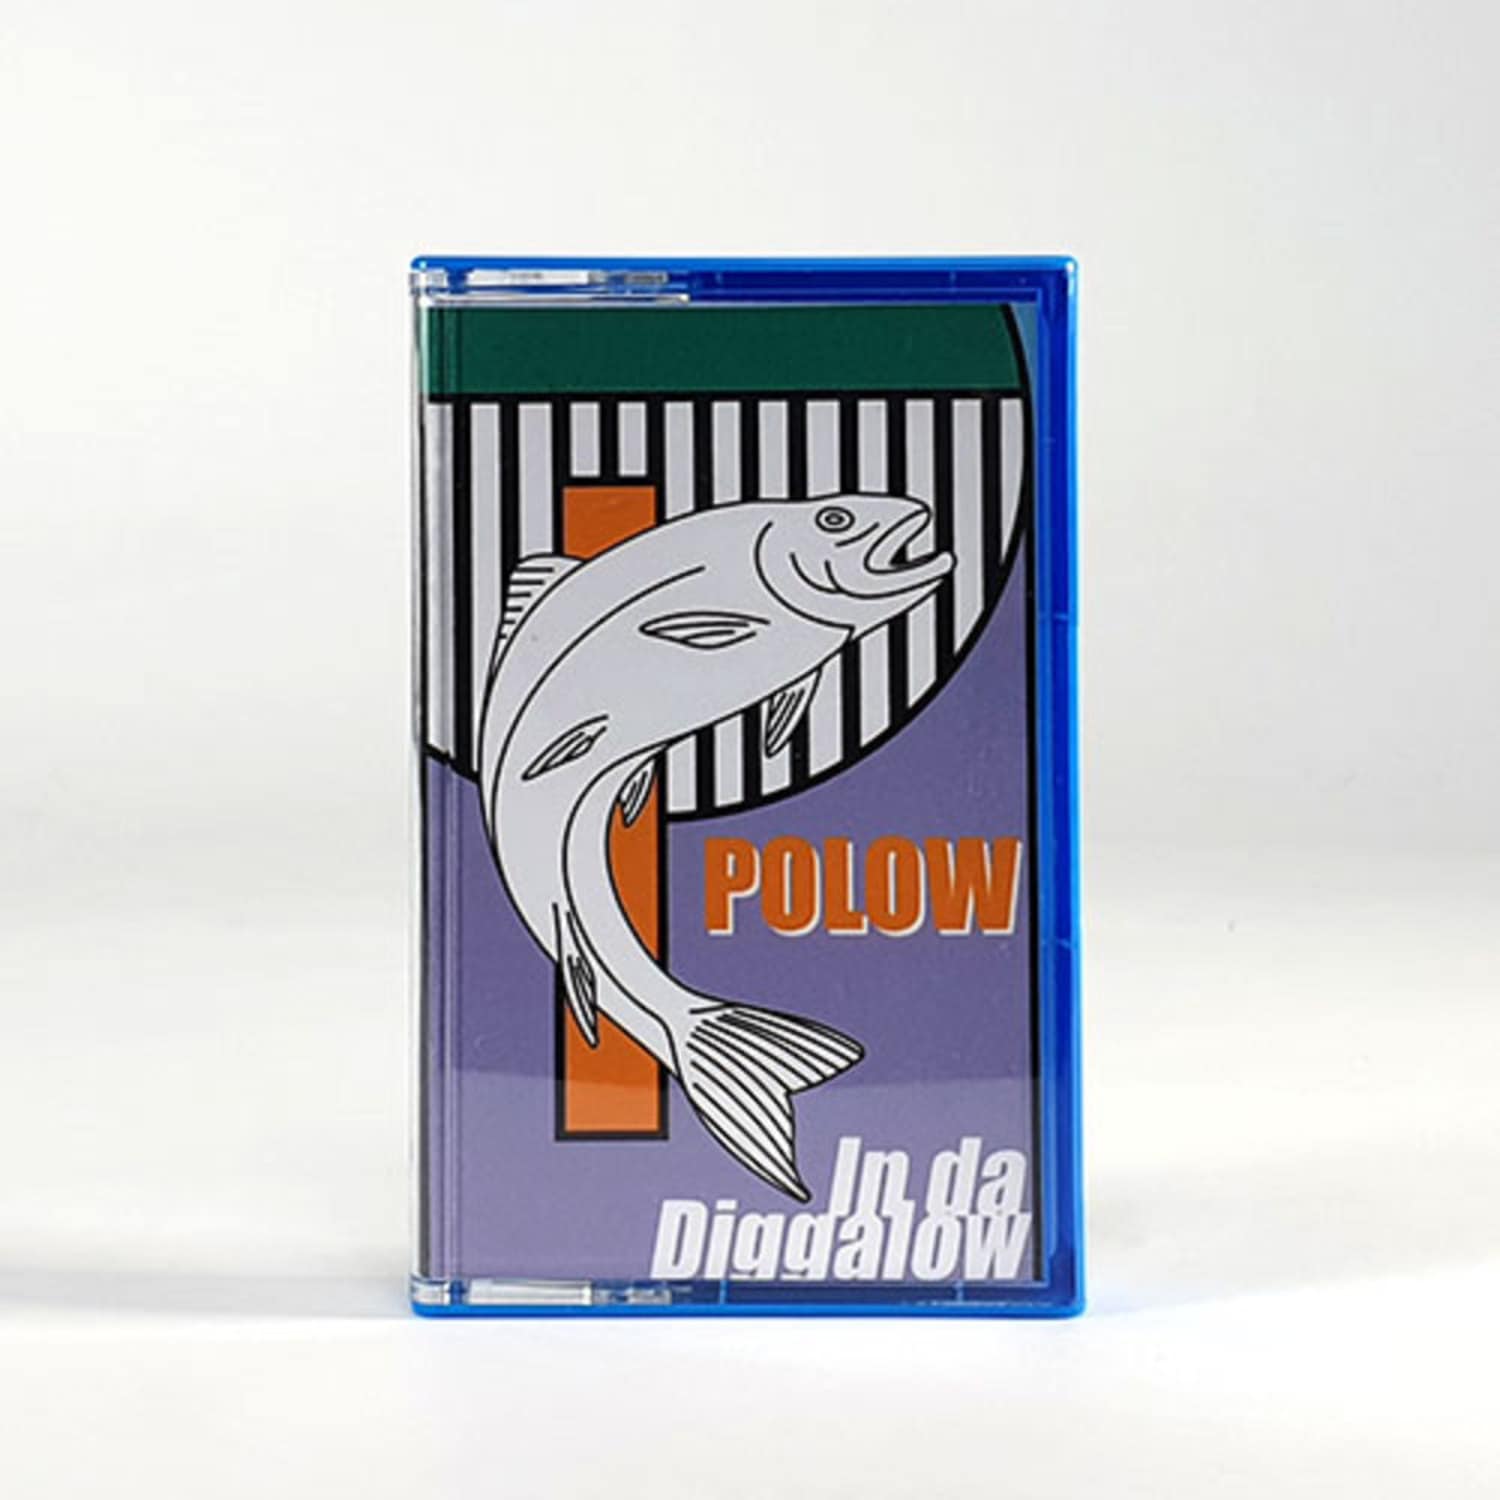 Polow - IN DA DIGGALOW 